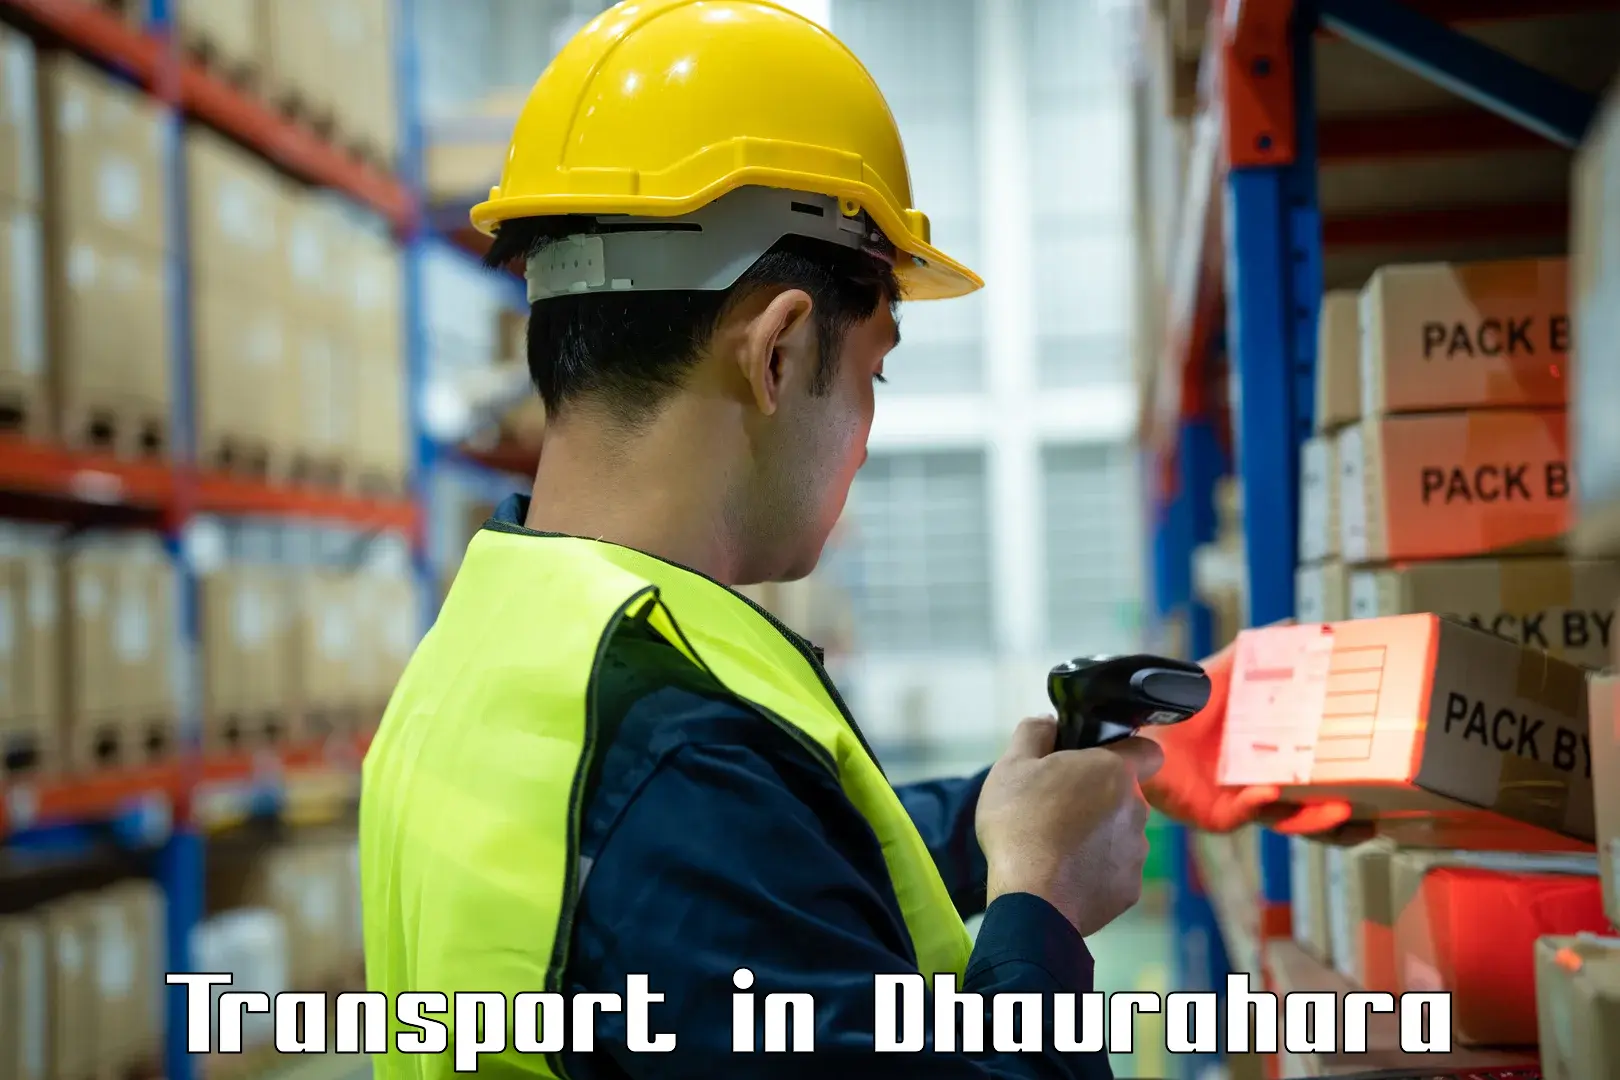 Domestic goods transportation services in Dhaurahara